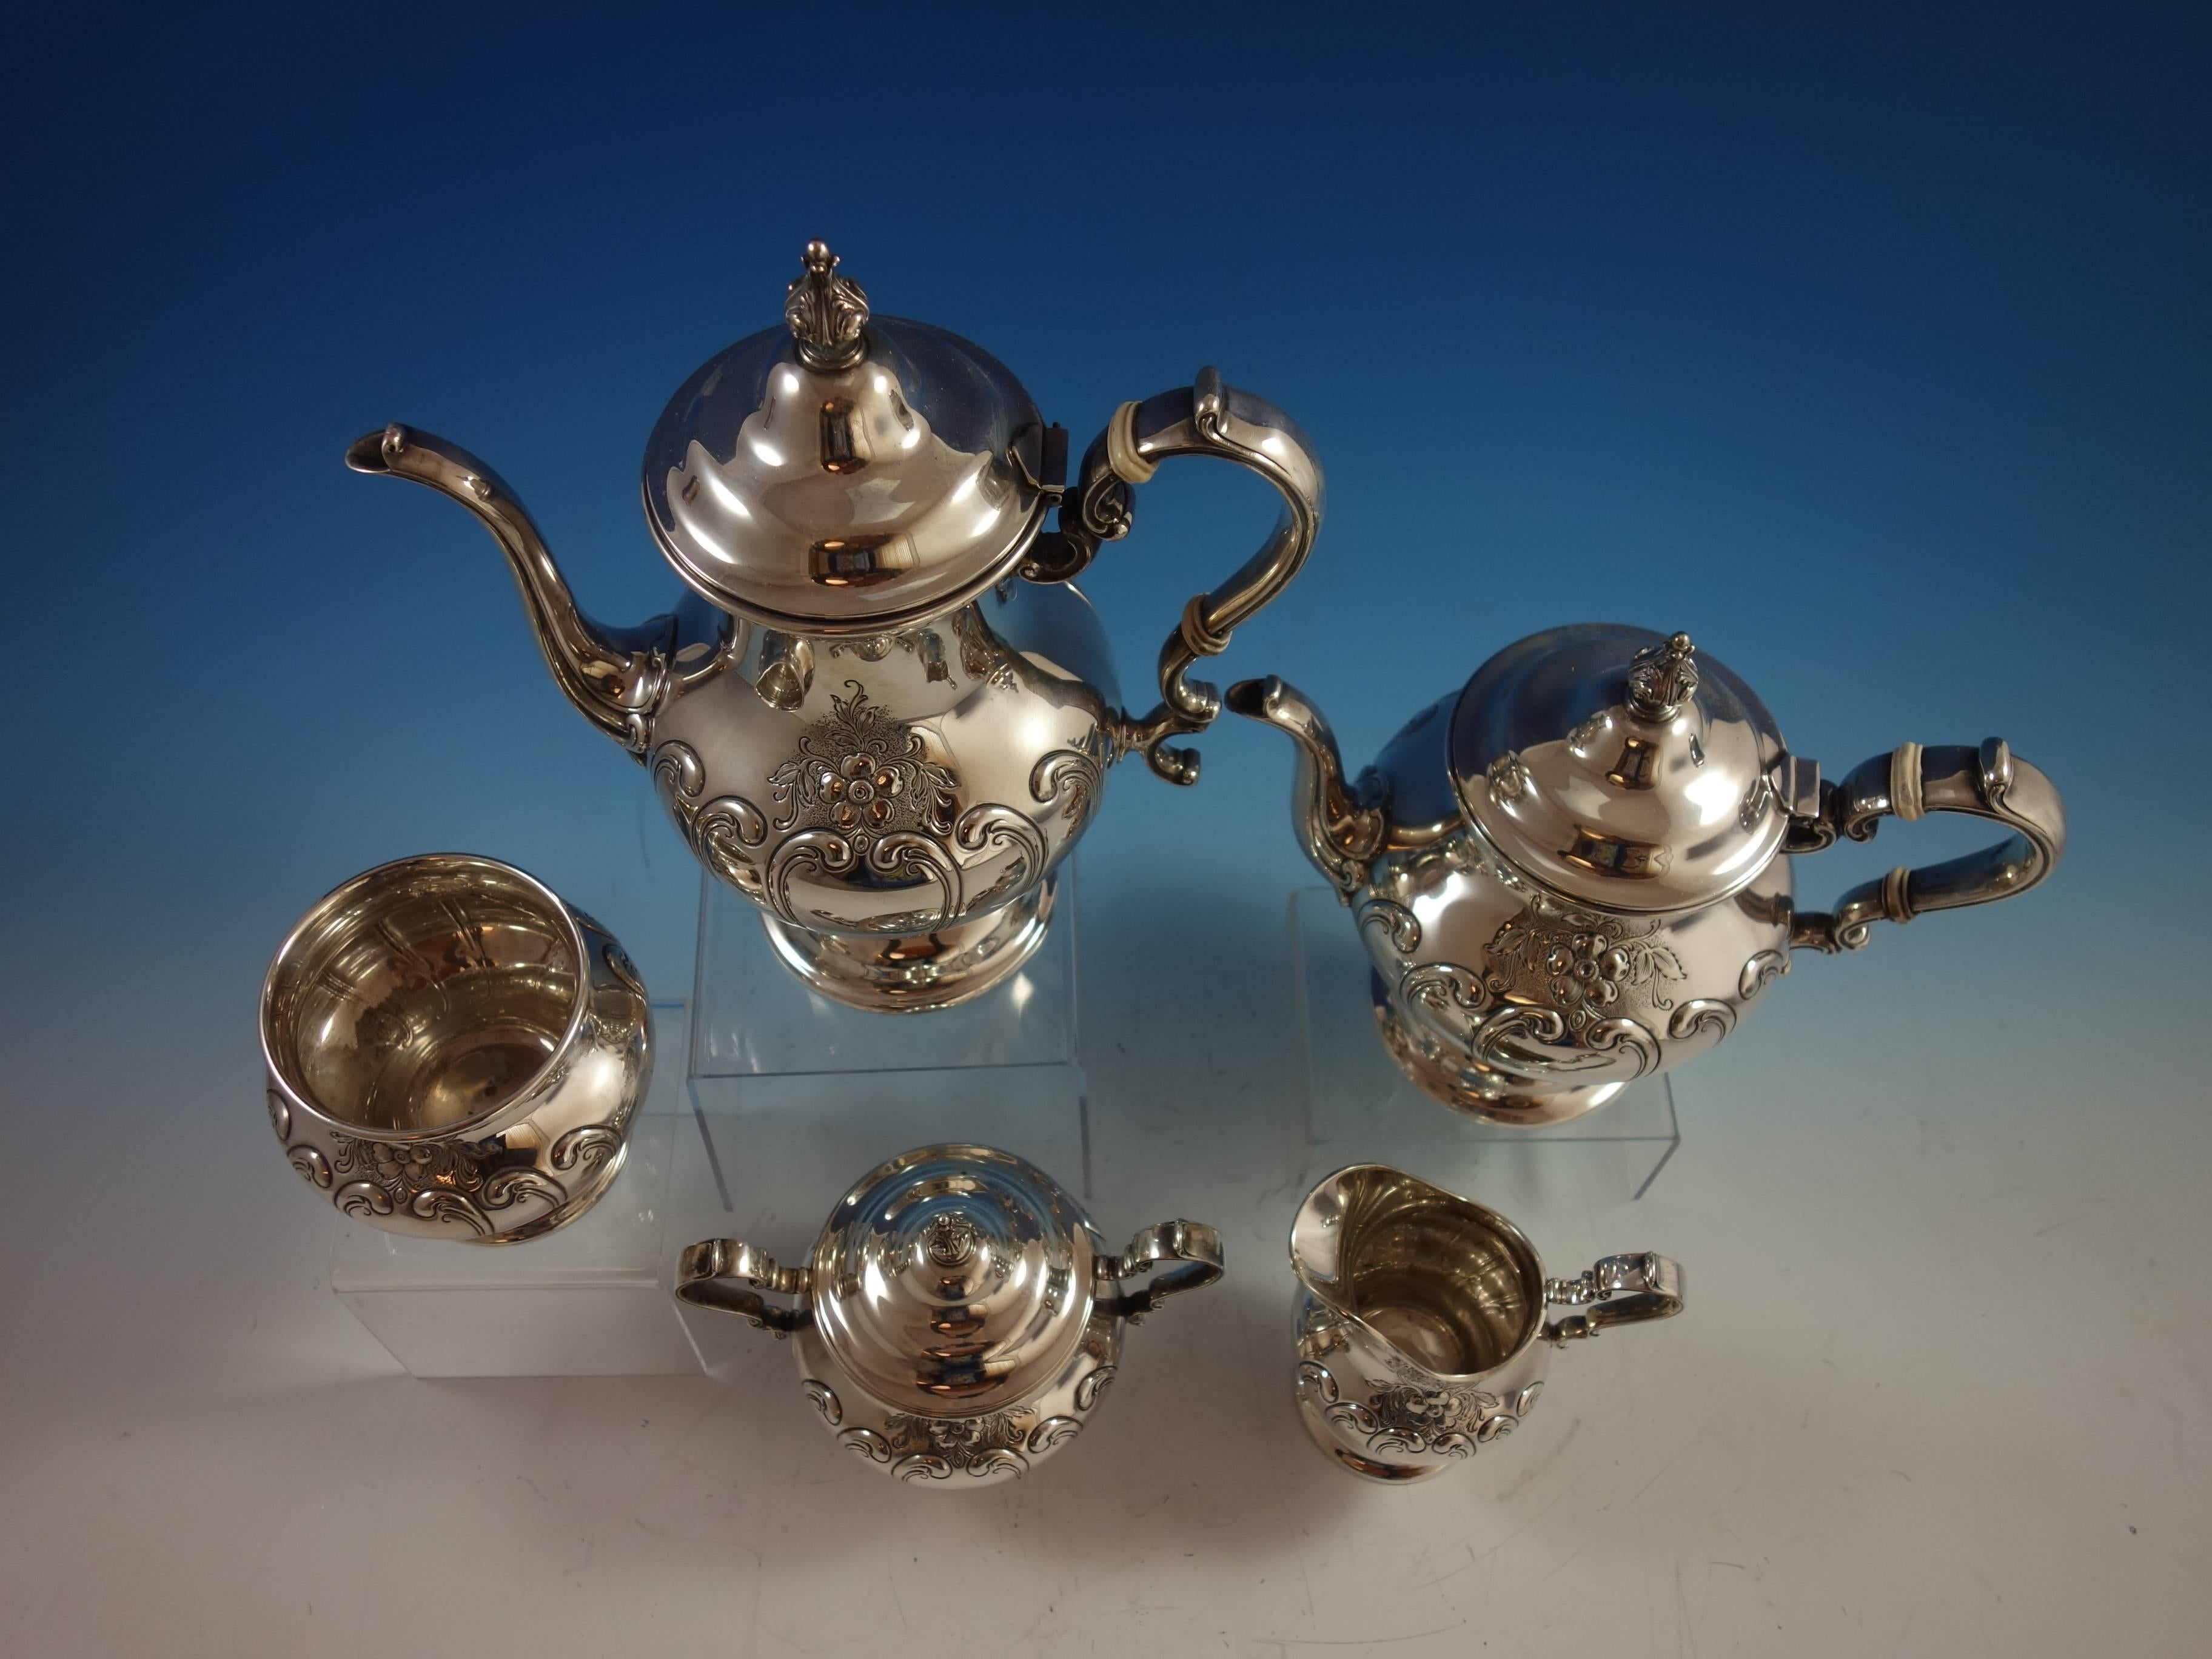 Chantilly Duchess by Gorham sterling silver hand chased tea set, five pieces. Date mark for 1957. This set includes: 

One coffee pot: Marked #1001-2, weighs 33.96 troy ounces, and measures 10